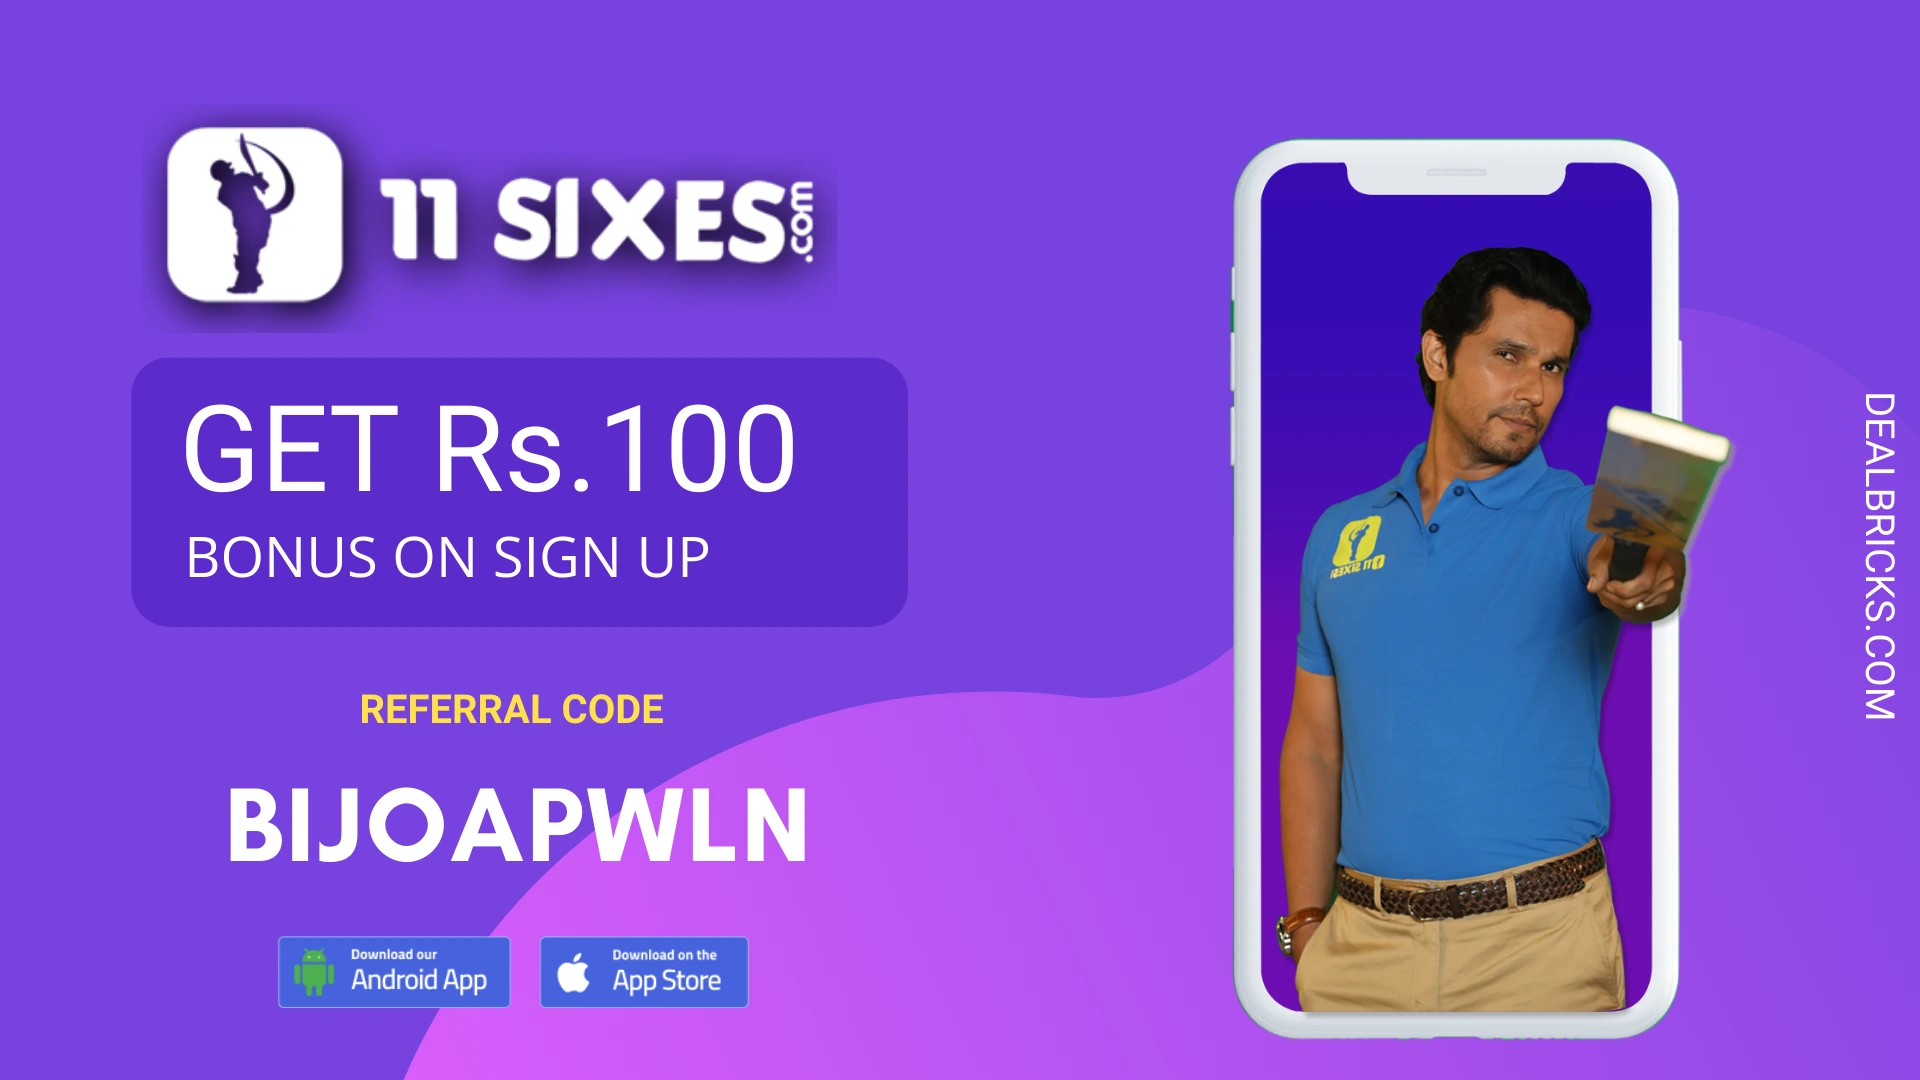 11Sixes Referral Code